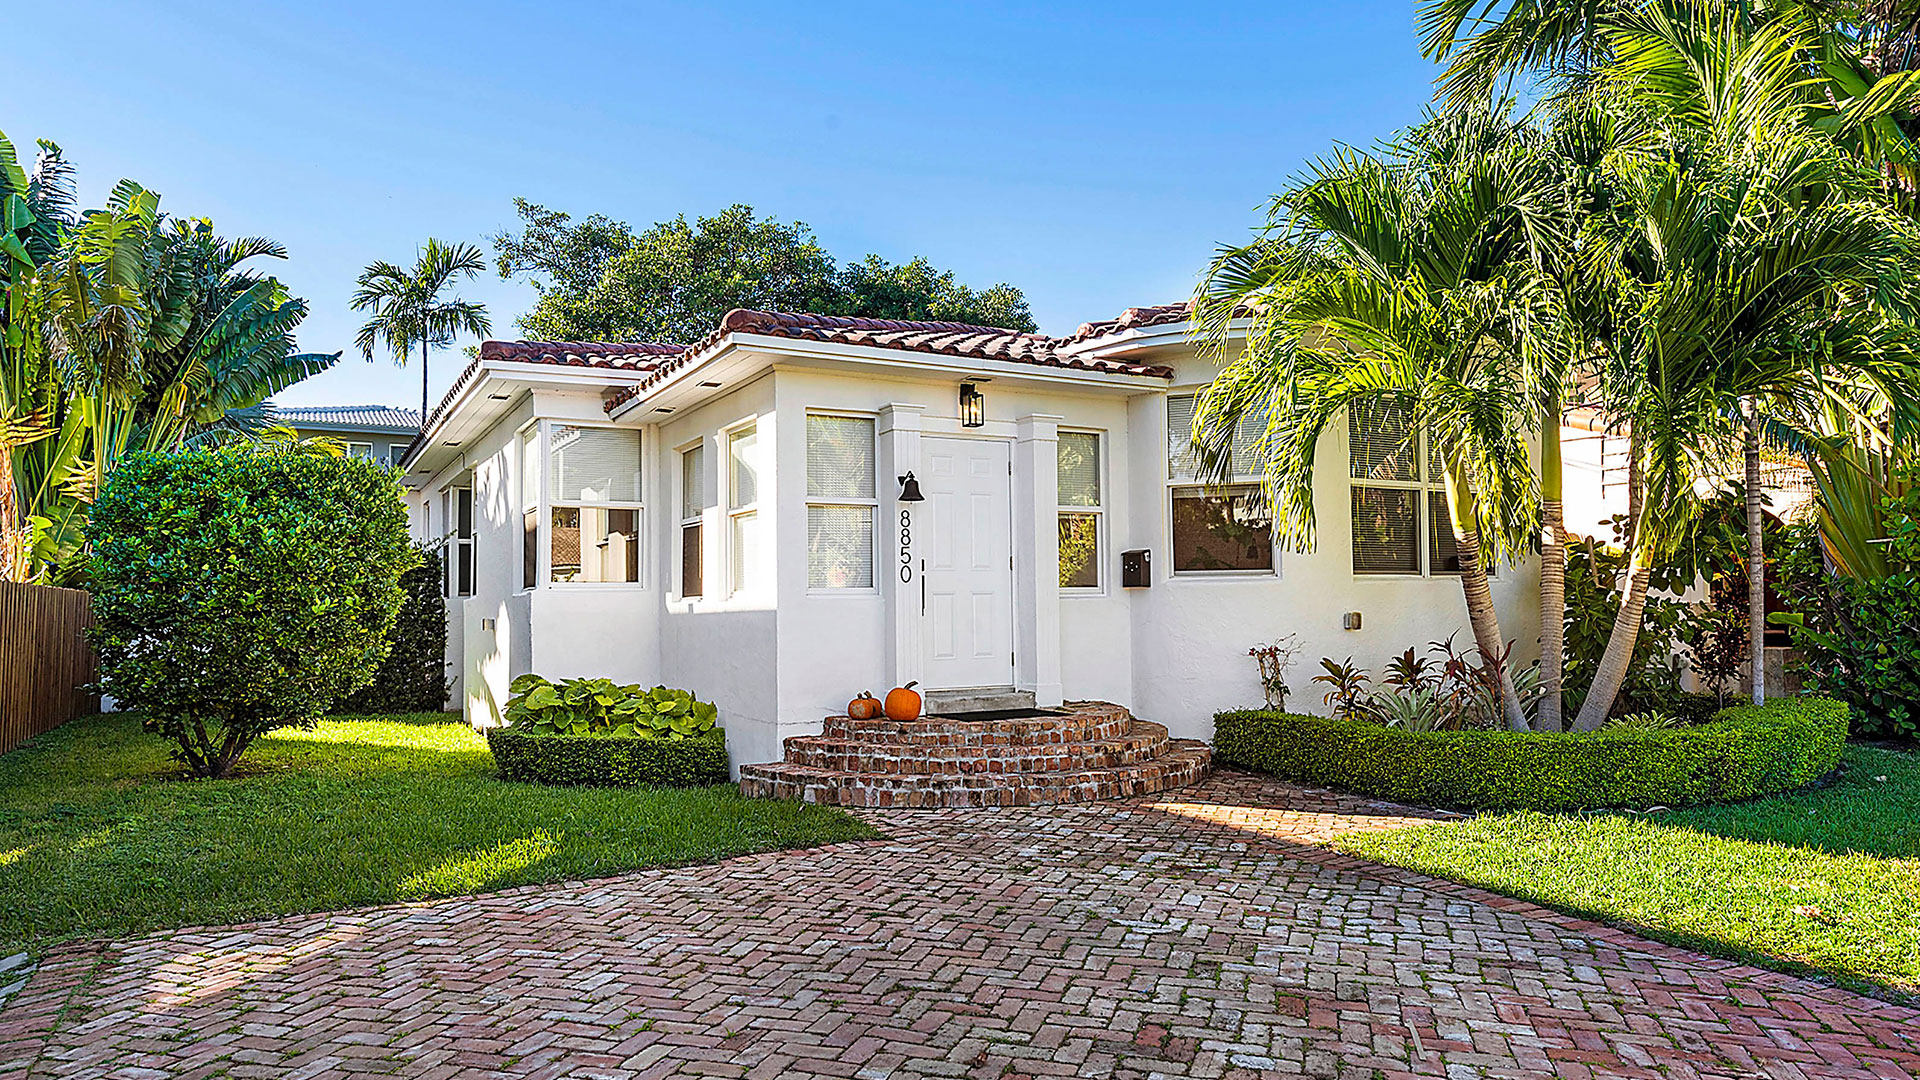 Gisele Bündchen bought this house in Miami's Surfside neighborhood for $1.25 million.  Given that she bought it 5 months before her divorce, speculation leads one to believe that she knew then that separation was her only option (The Grosby Group)